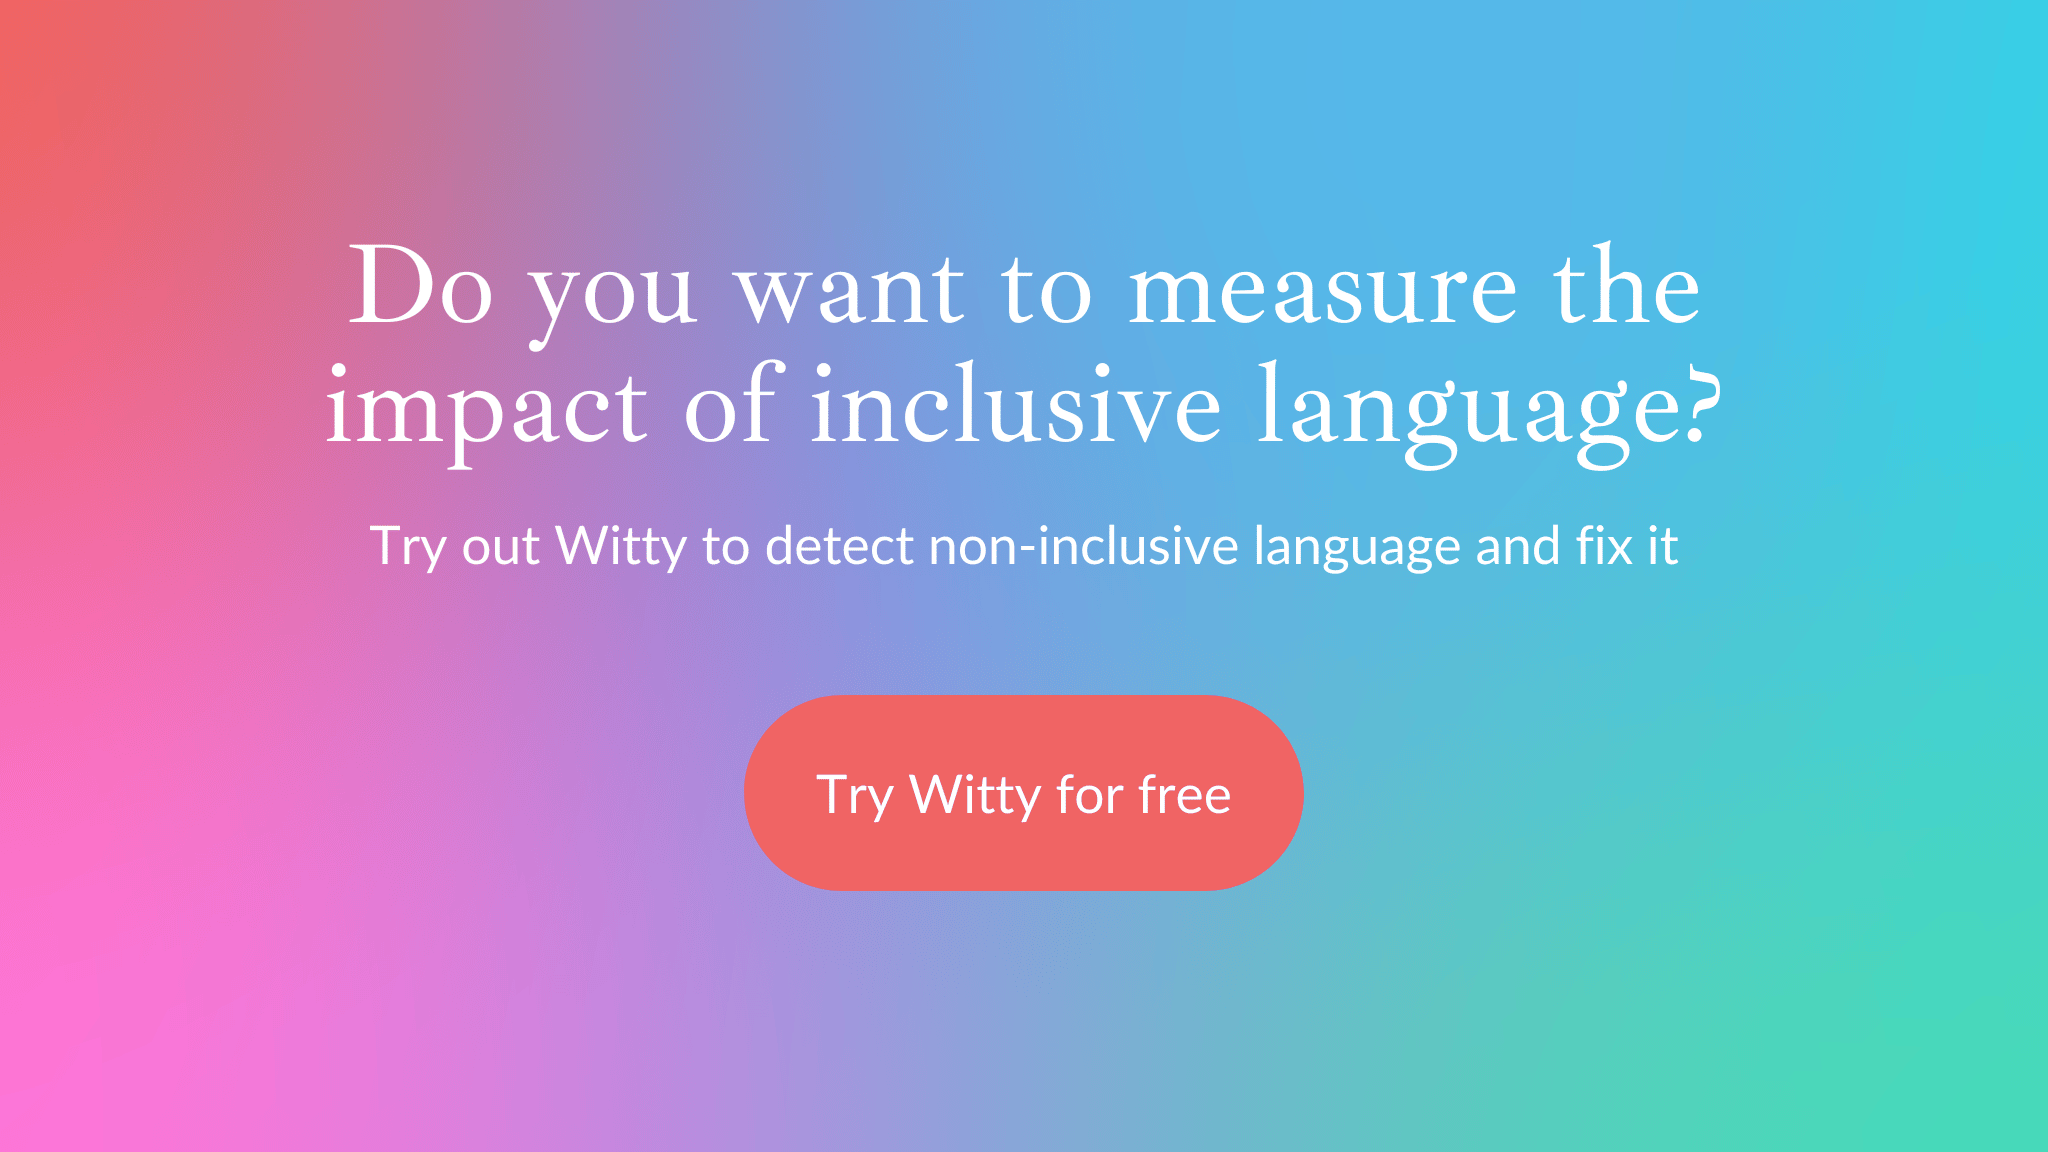 Do you want to measure the impact of inclusive language?